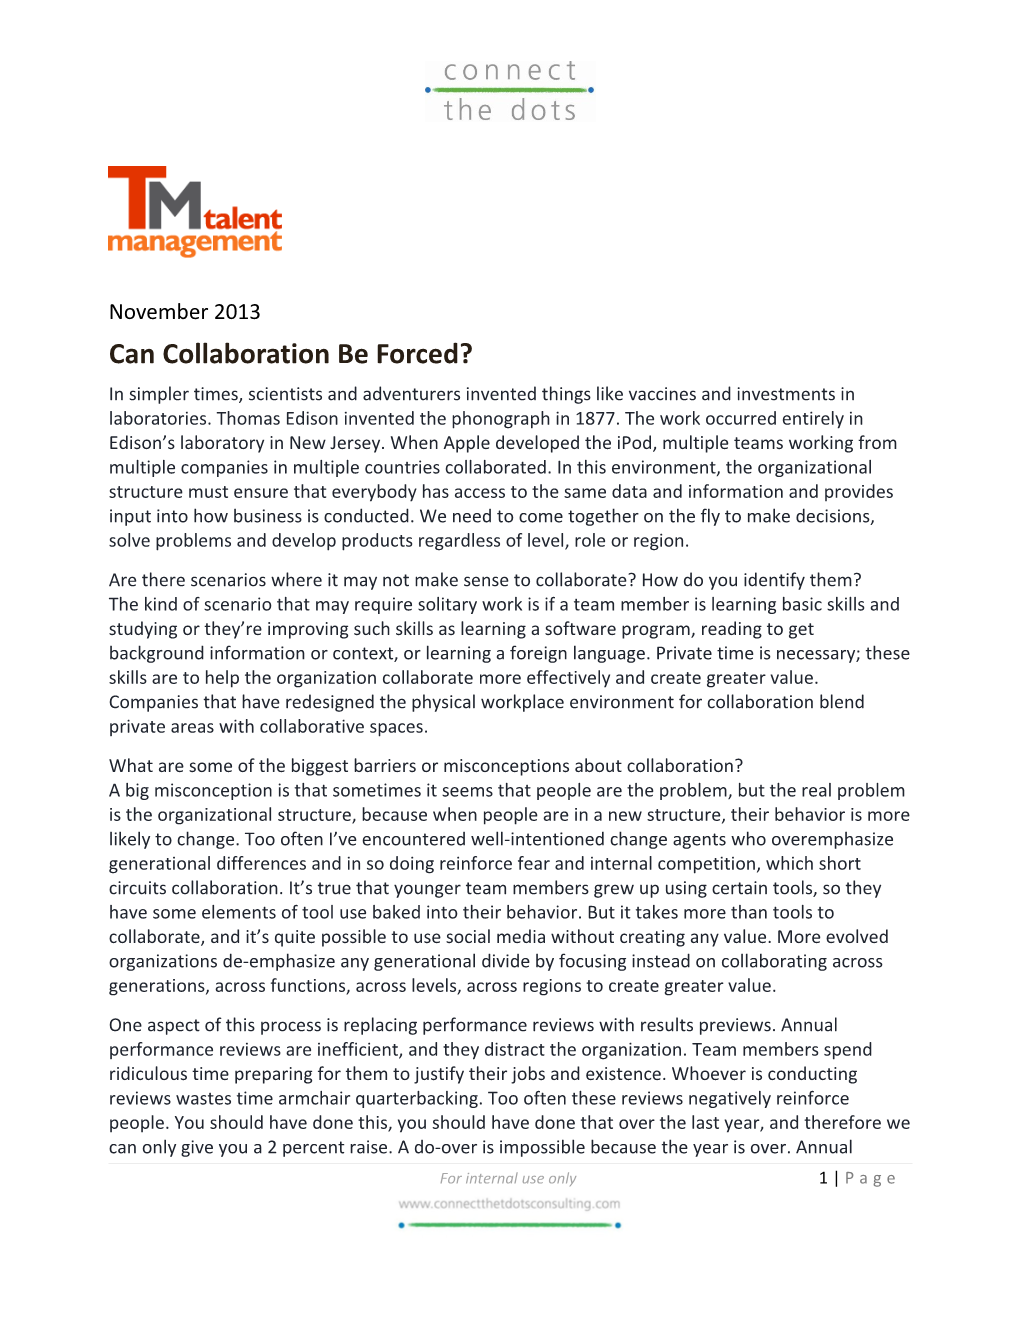 Can Collaboration Be Forced?